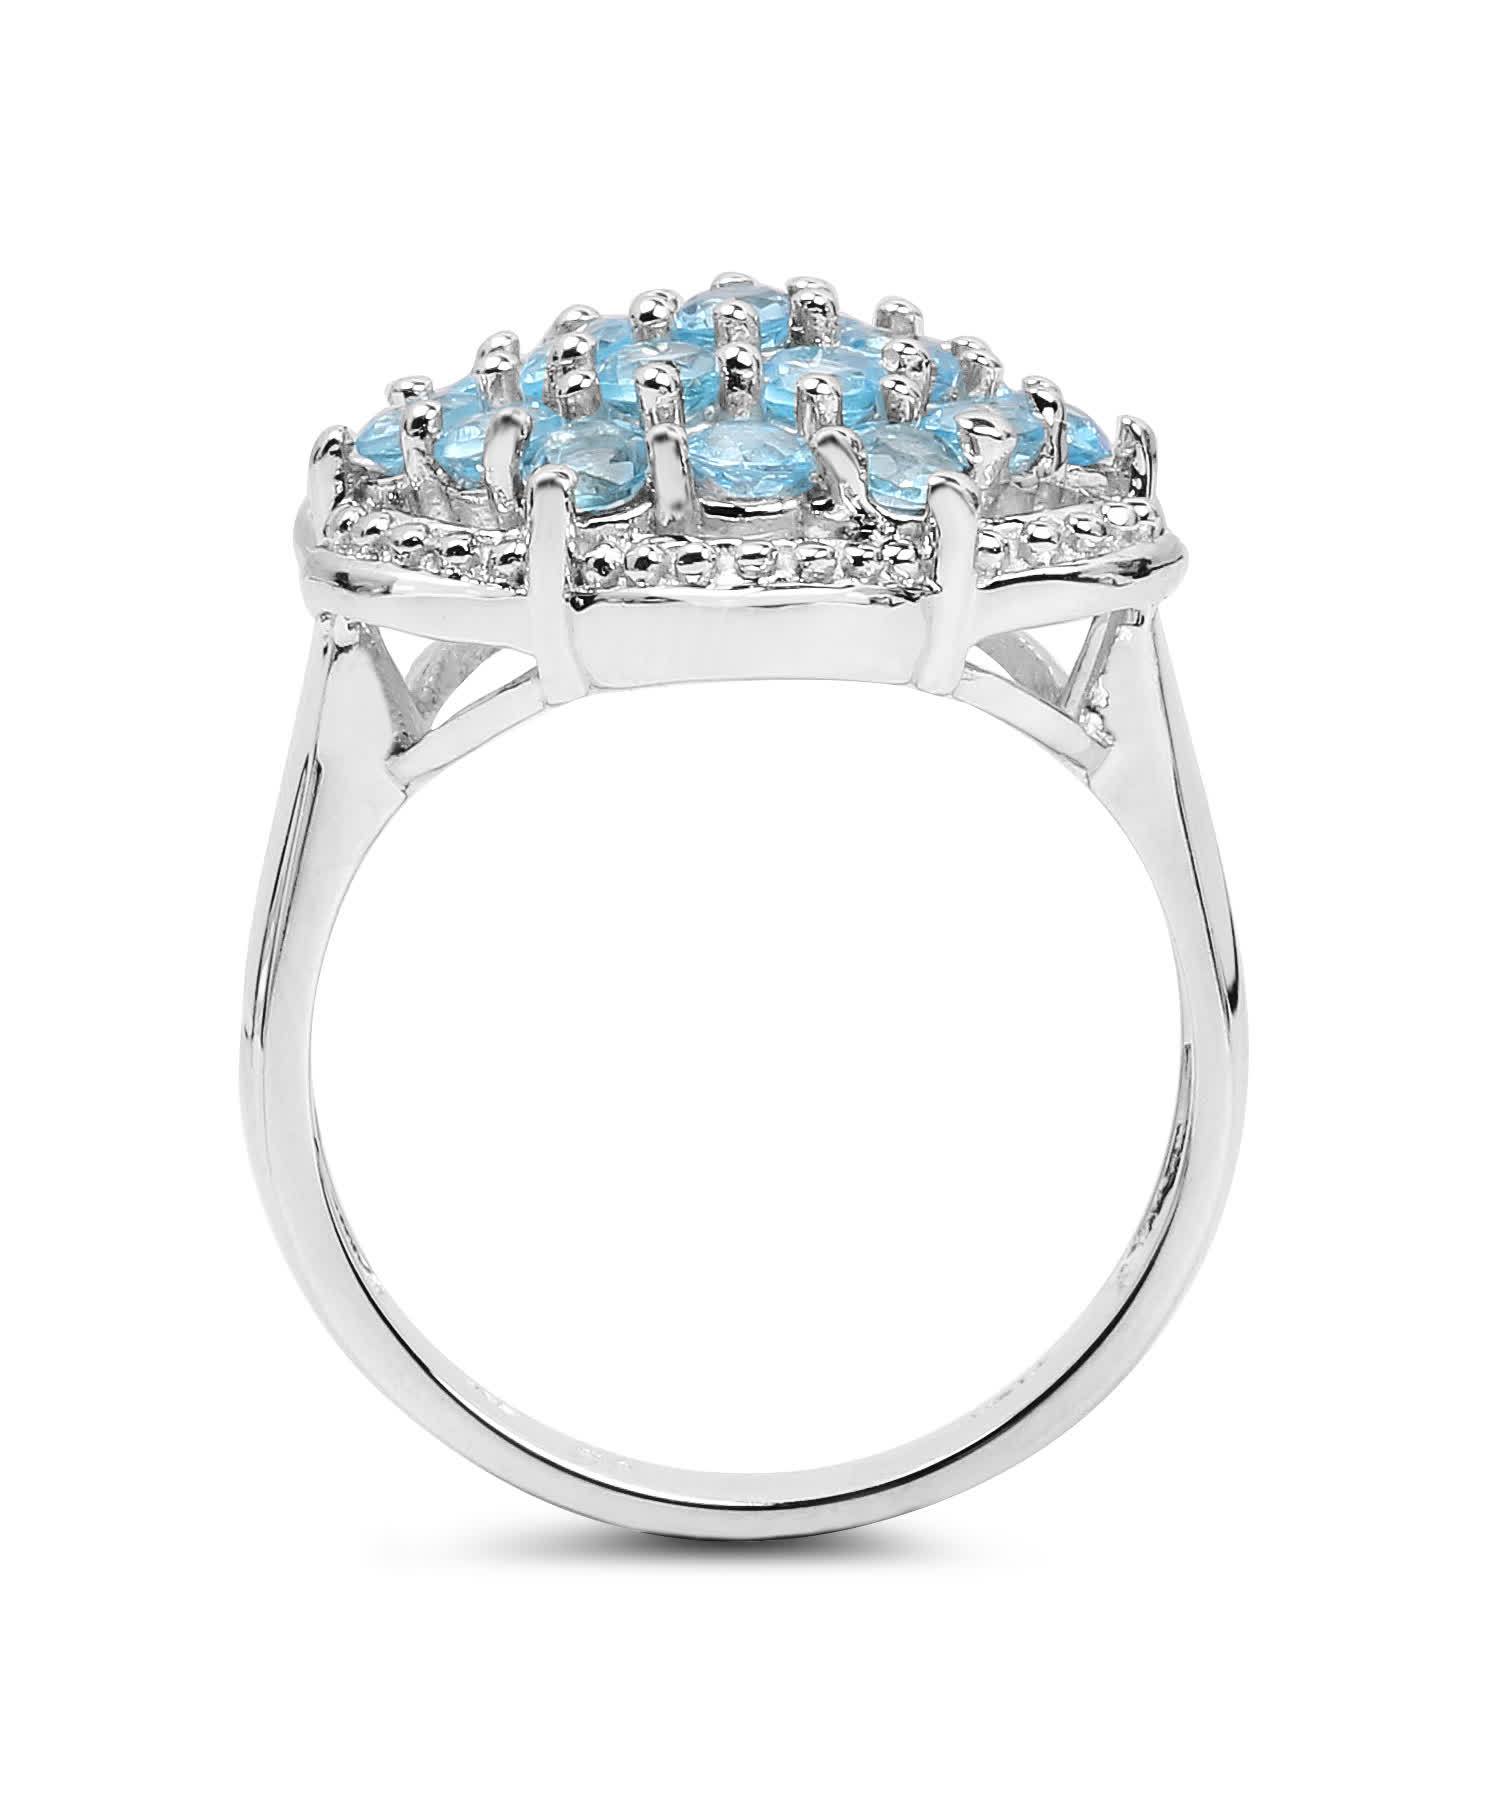 1.90ctw Natural Swiss Blue Topaz Rhodium Plated 925 Sterling Silver Cocktail Ring View 2